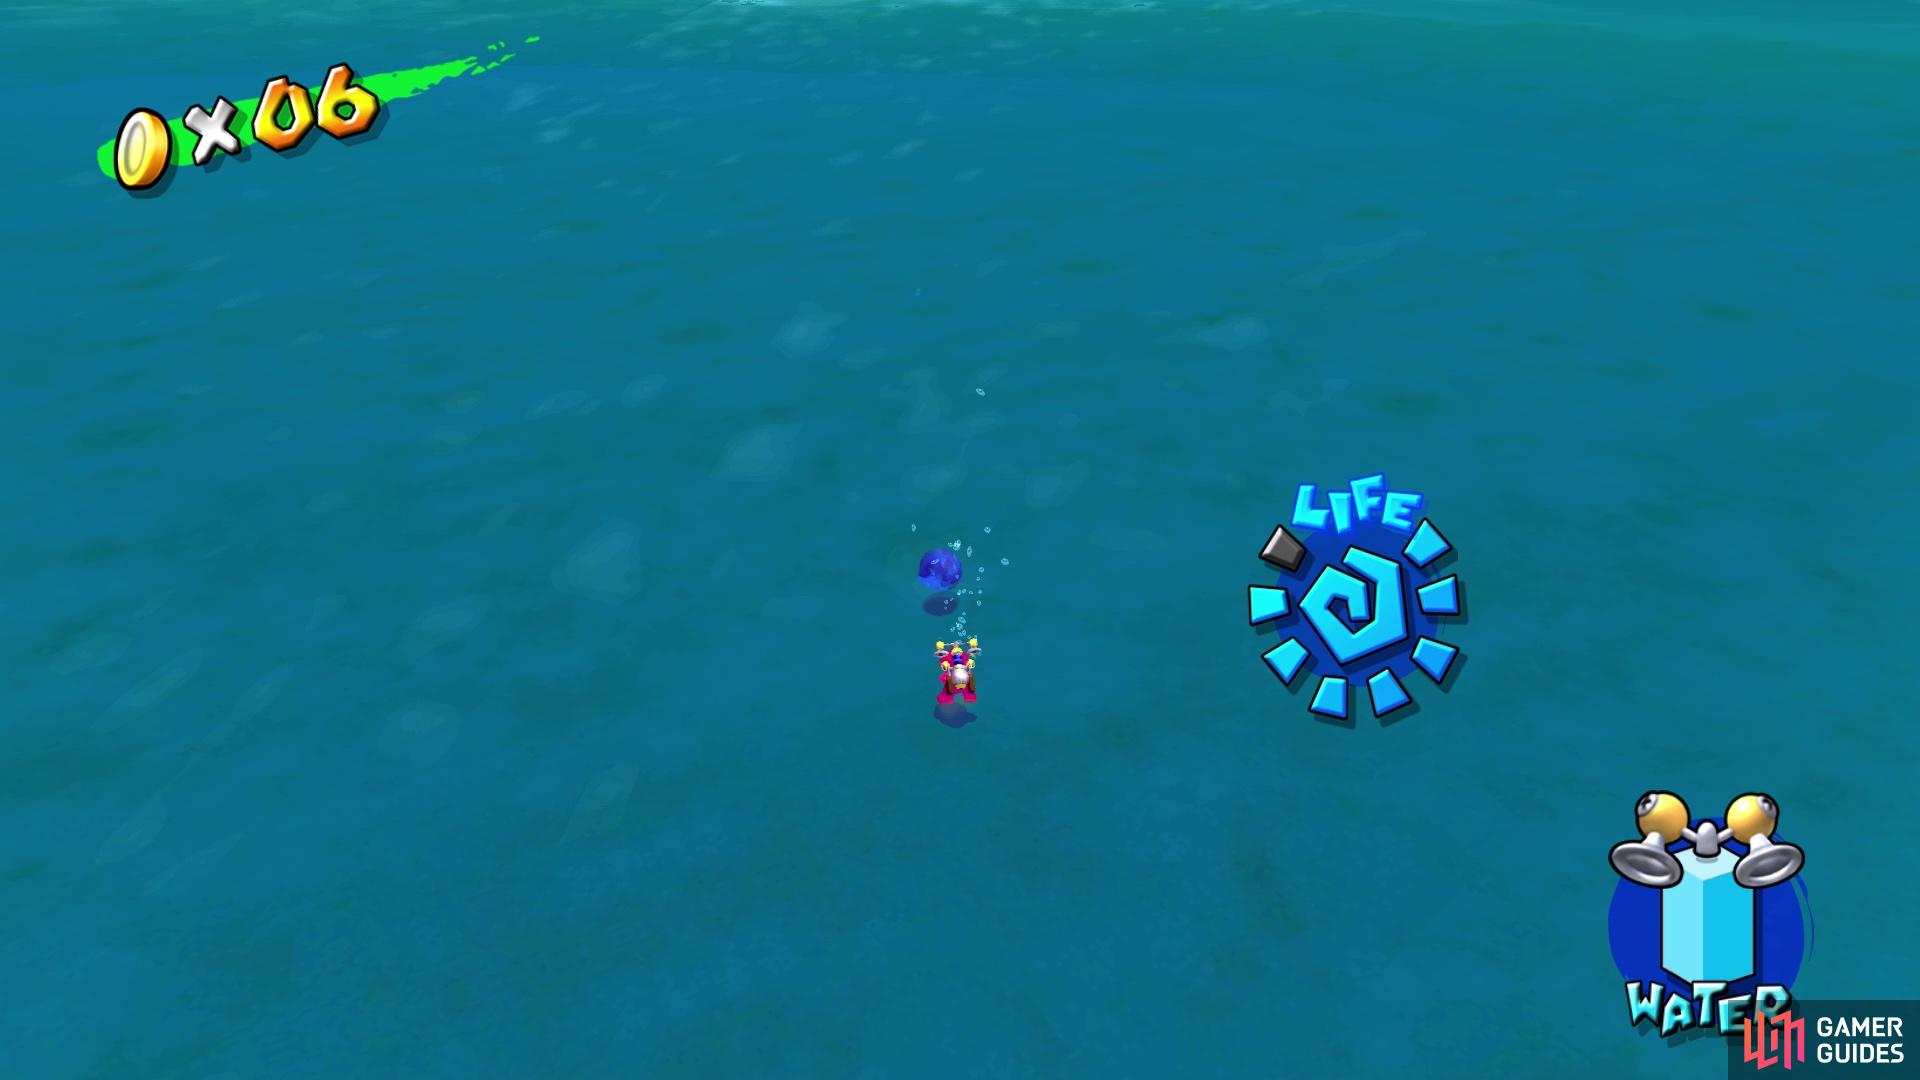 Blue Coin #11 is in the water in between the island and reef